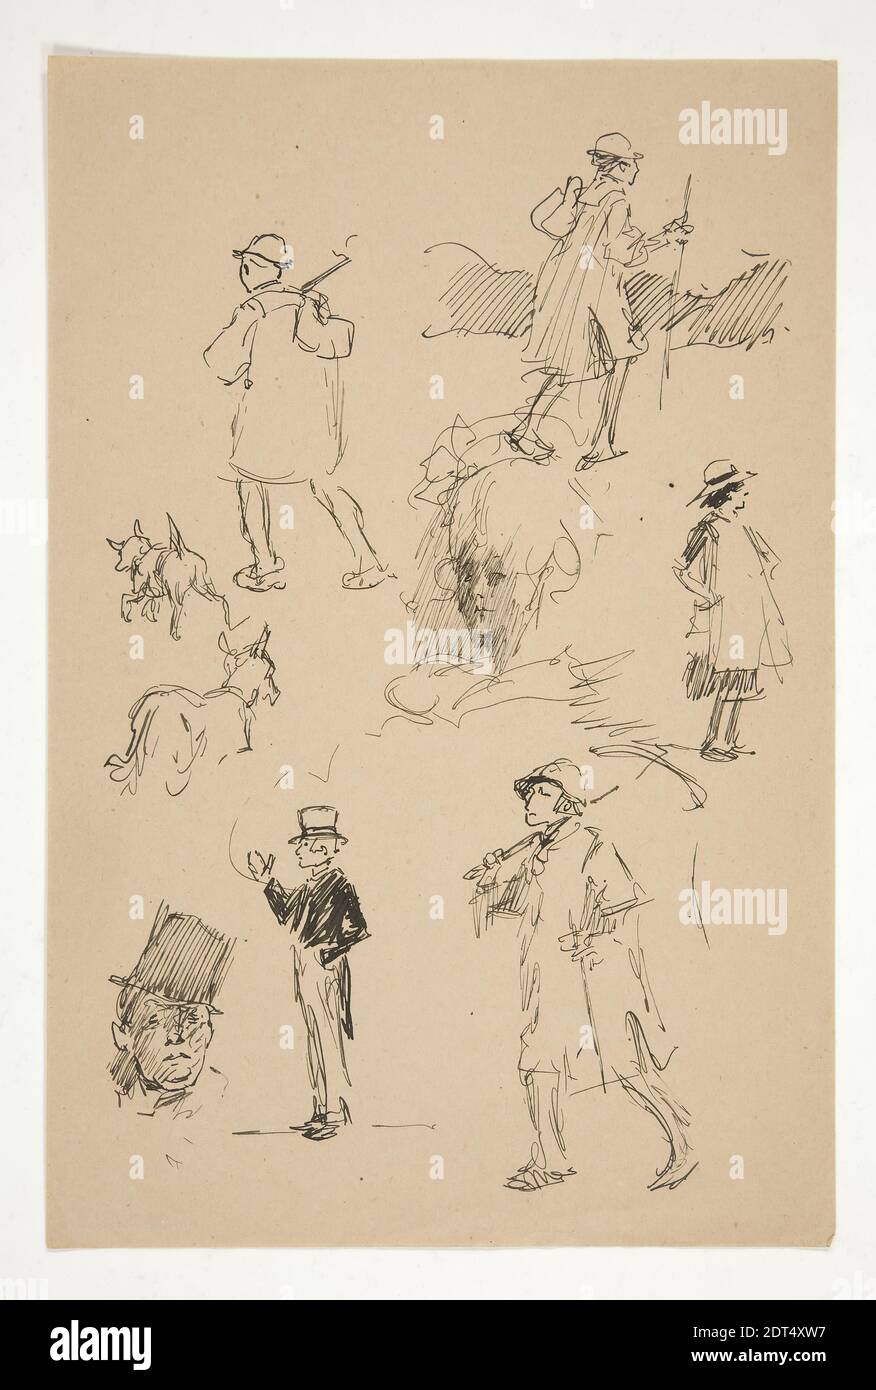 Artist: Edwin Austin Abbey, American, 1852–1911, M.A., 1897, Sheet of sketches of country figures, Pen and ink, Brown wove, 22.6 × 15 cm (8 7/8 × 5 7/8 in.), Made in United States, American, 19th century, Works on Paper - Drawings and Watercolors Stock Photo